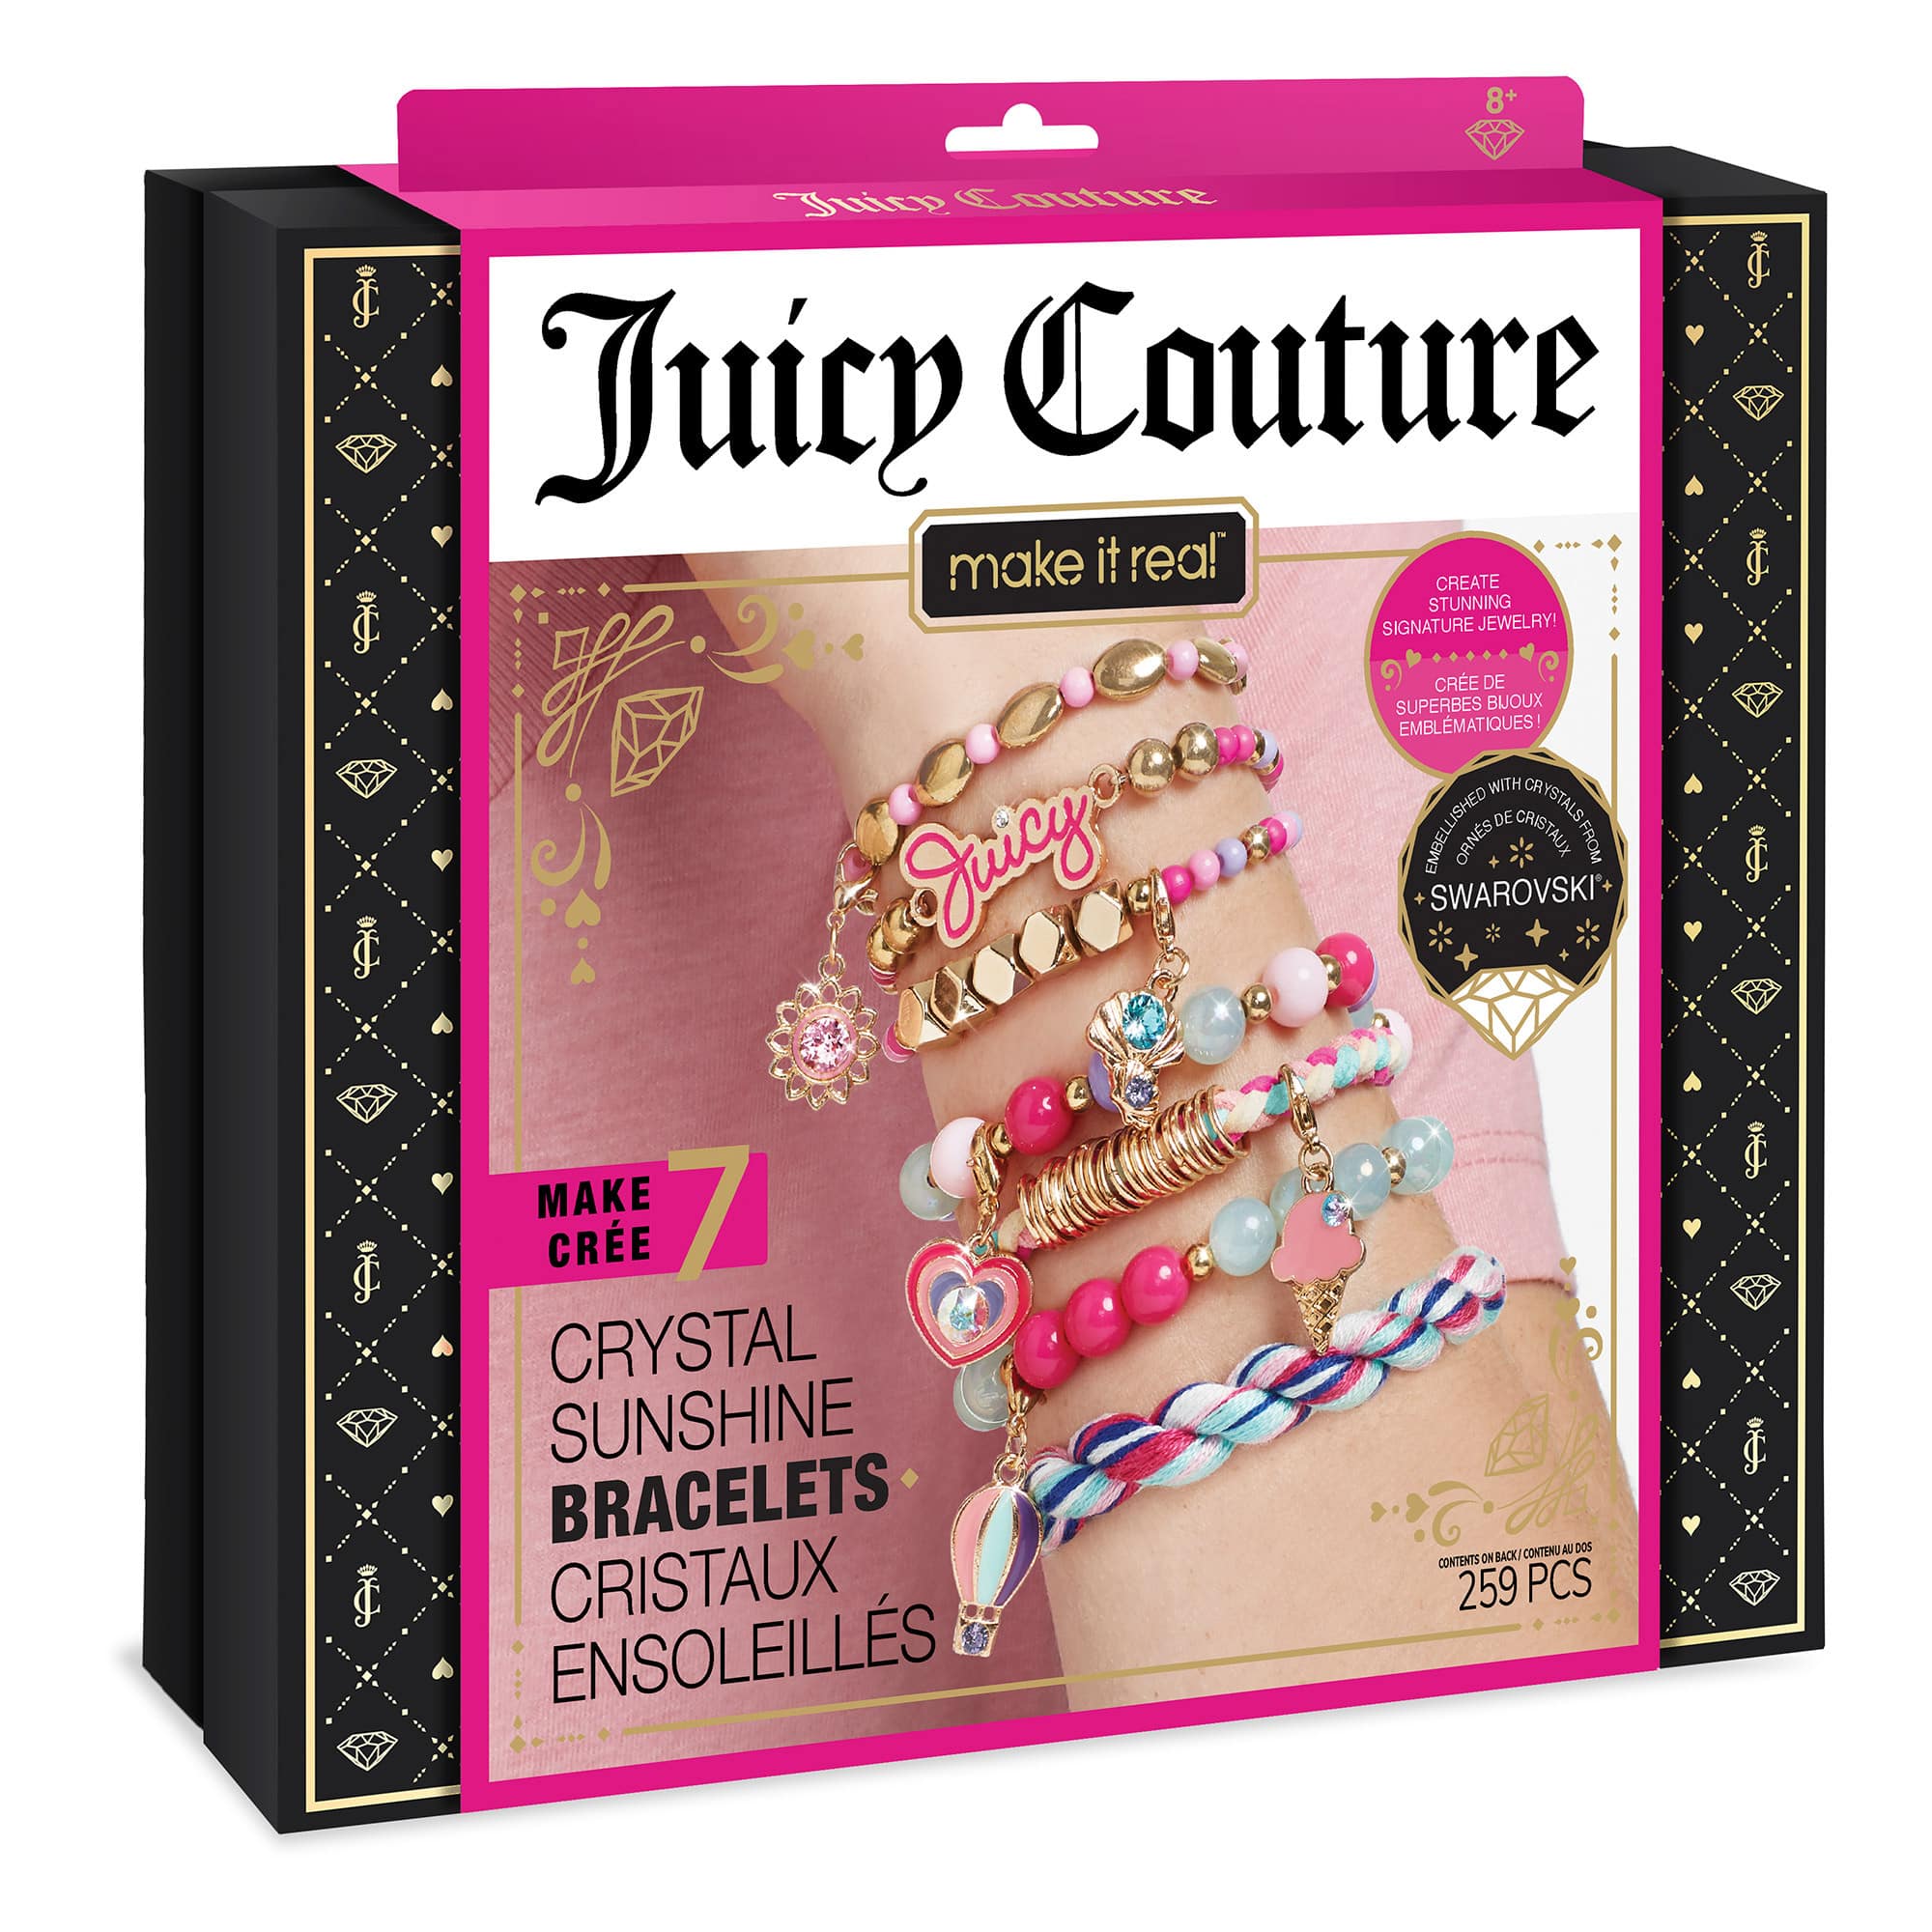 Make It Real - Juicy Couture - Crystal Sunshine Bracelets with Swarovski Crystals